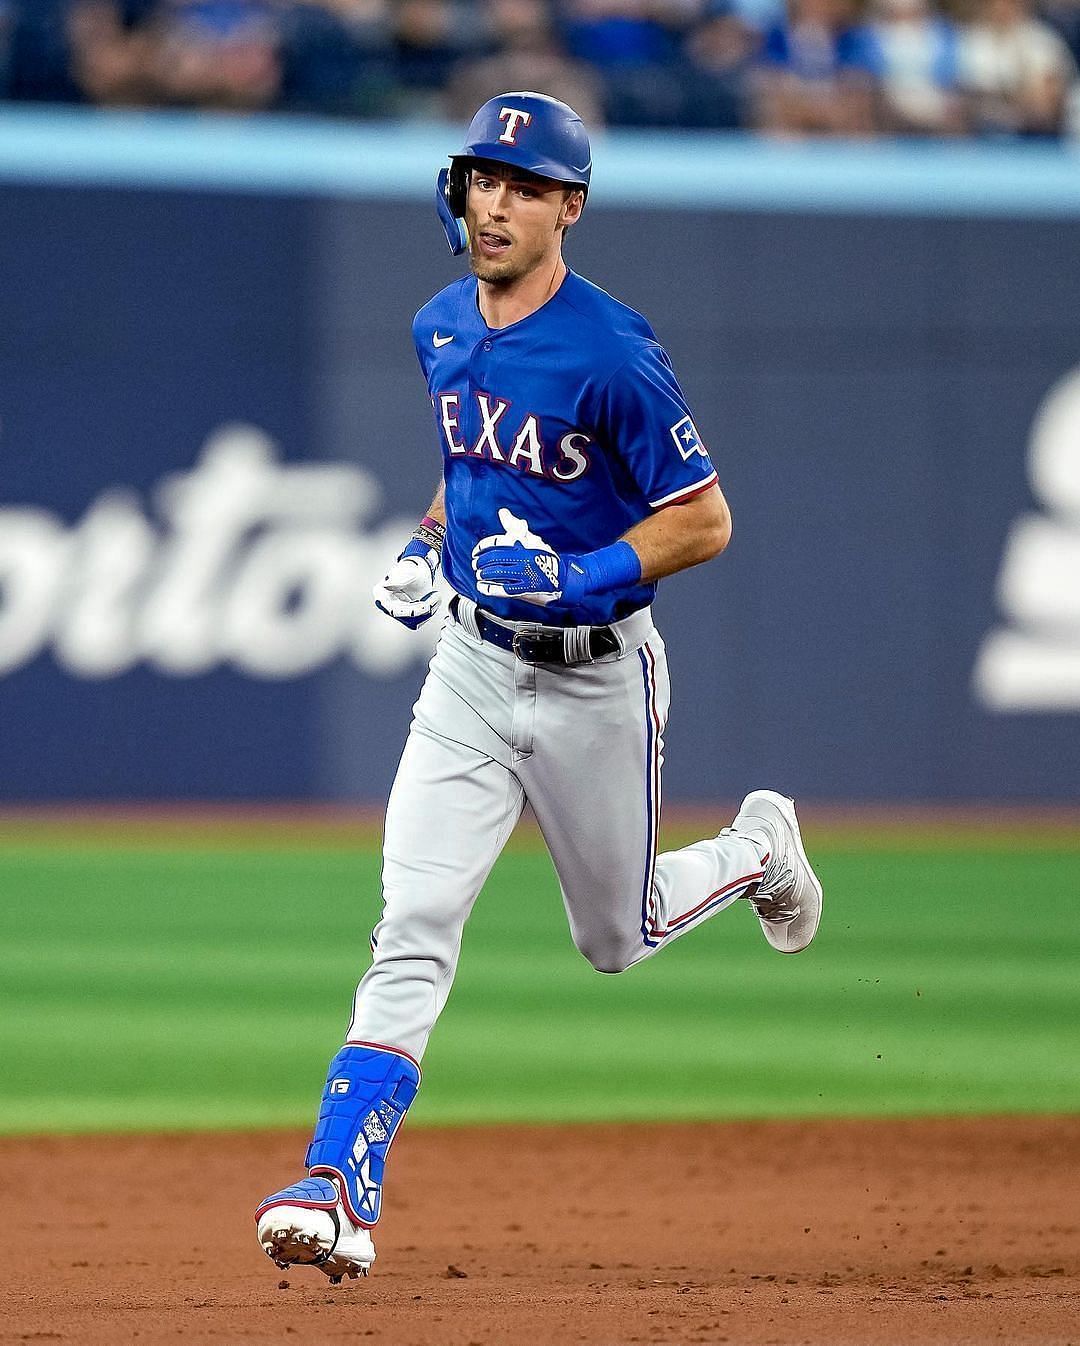 The Sunday Read: Ian Kinsler and the biggest stolen base in Rangers history  - Jeff Wilson's Texas Rangers Today